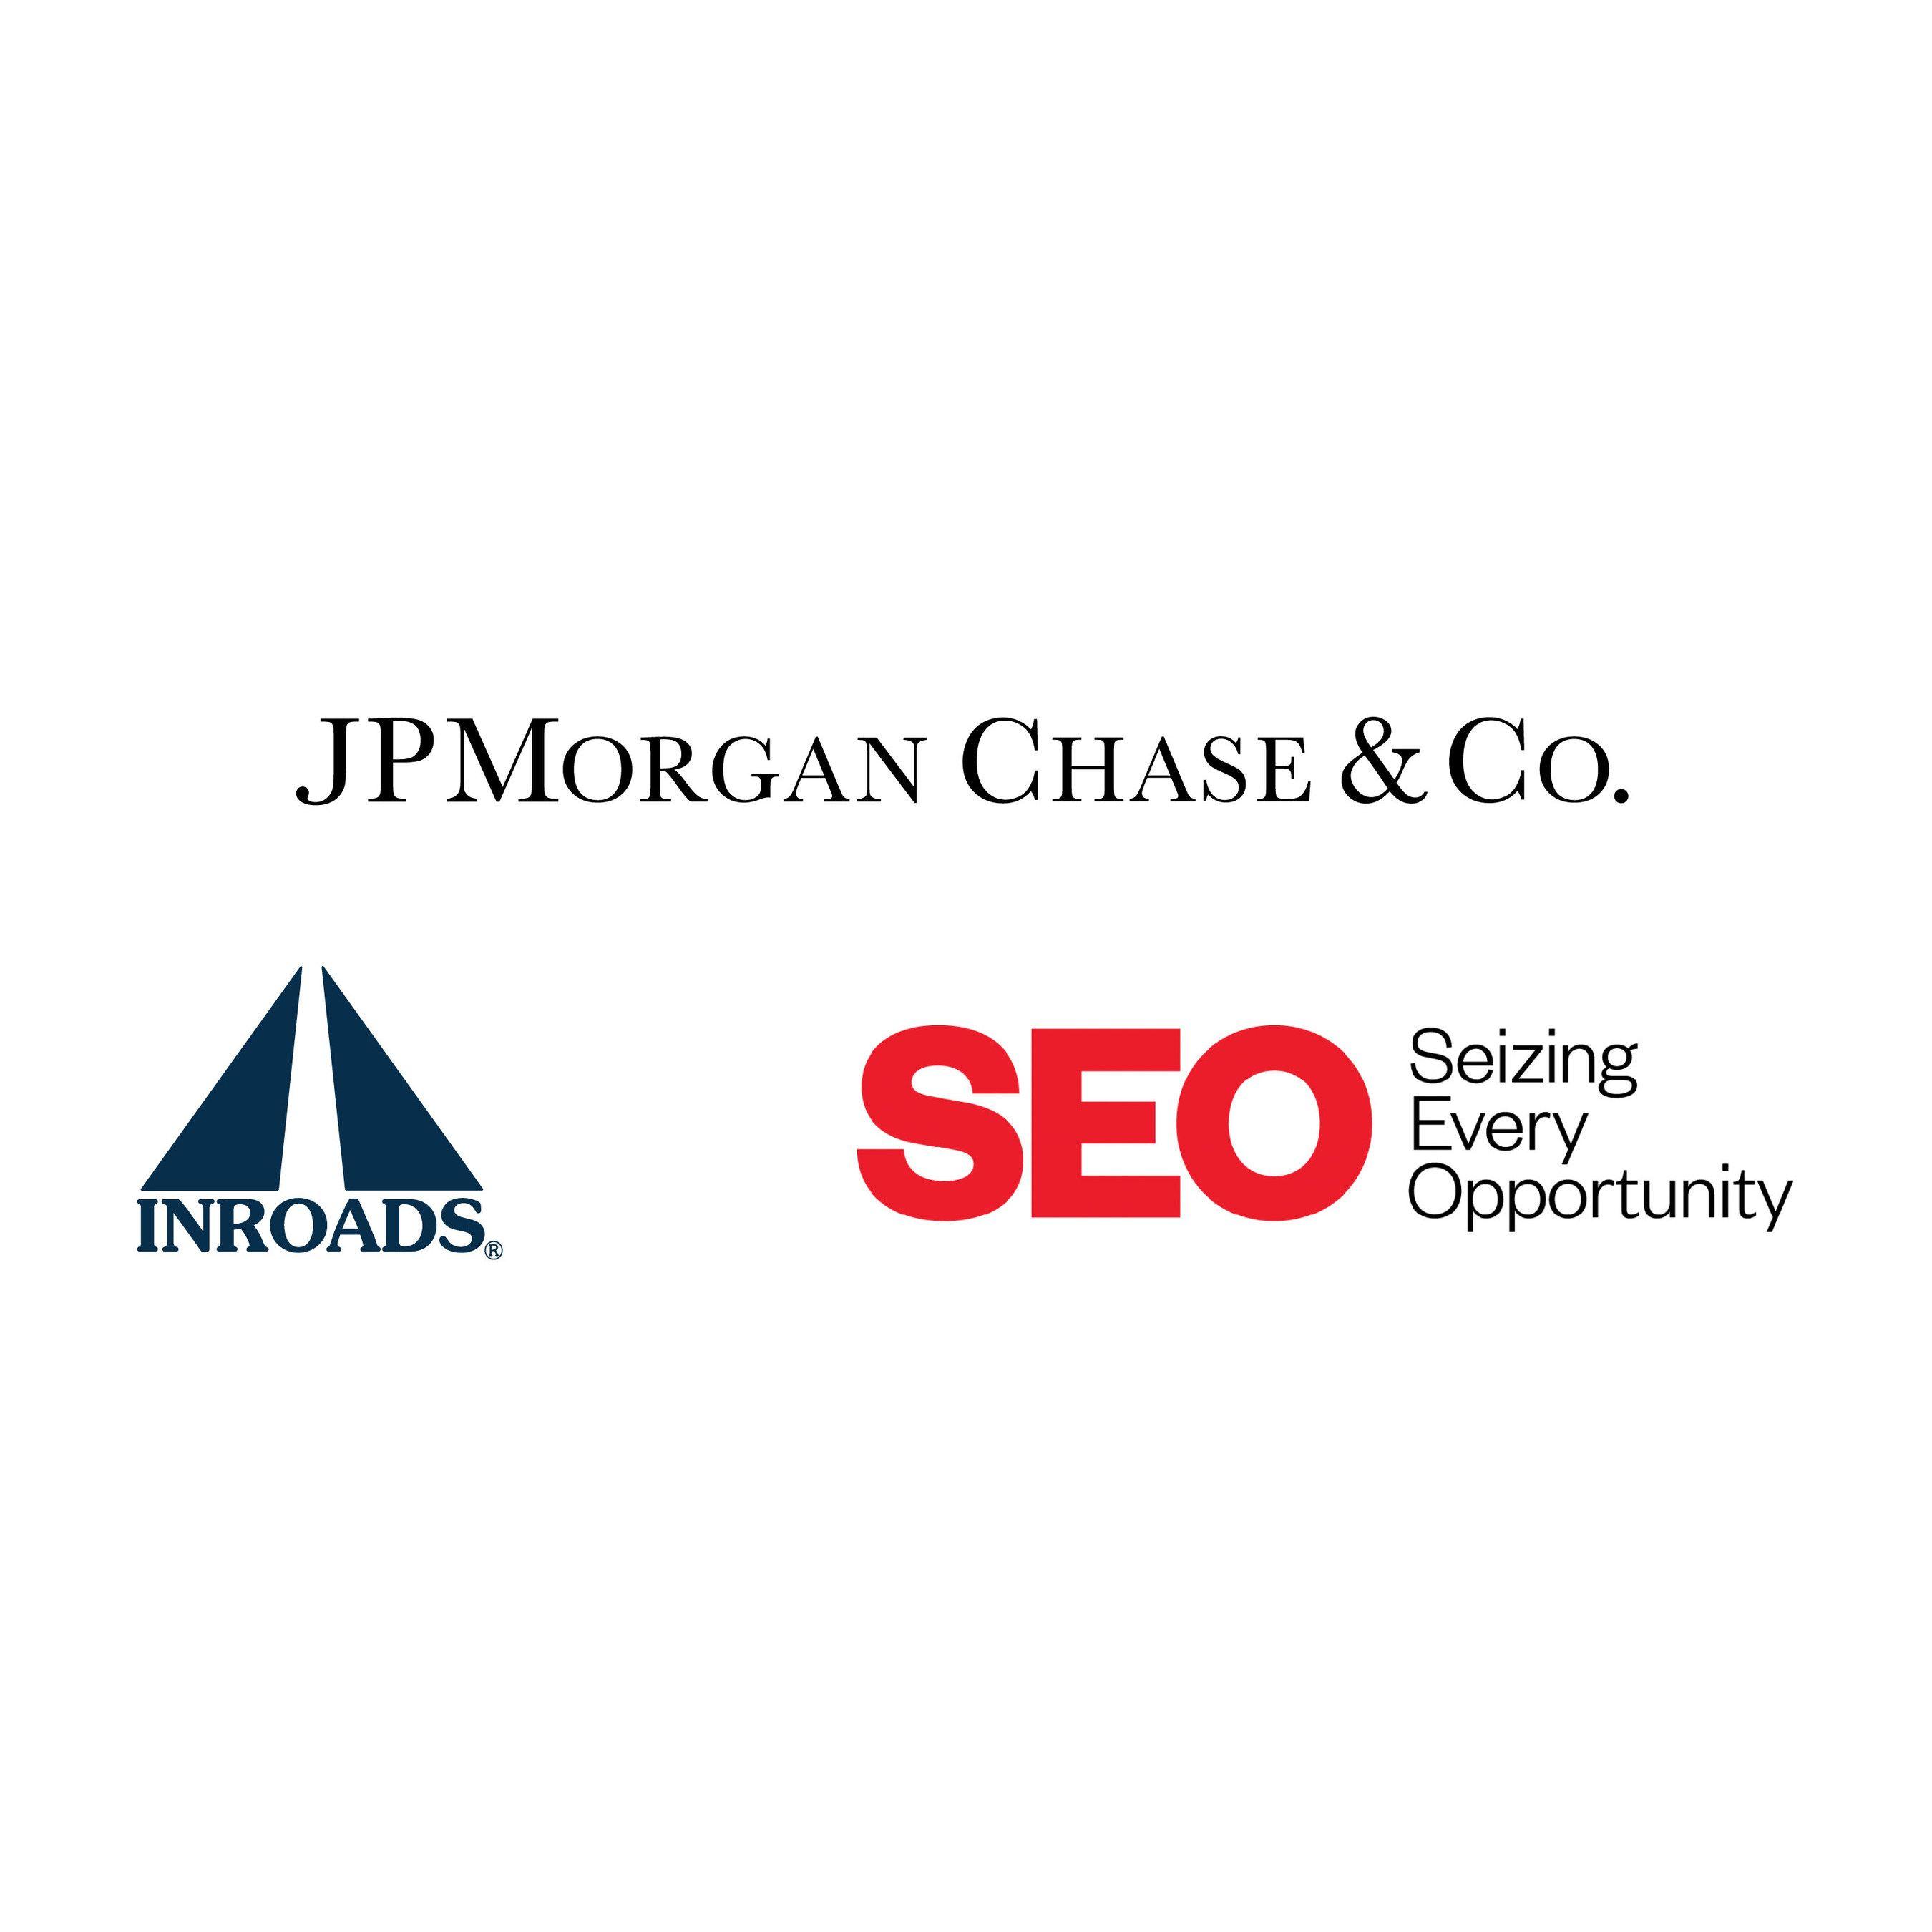 Inroads Logo - INROADS, SEO and JPMorgan Chase & Co. Join Forces to Launch